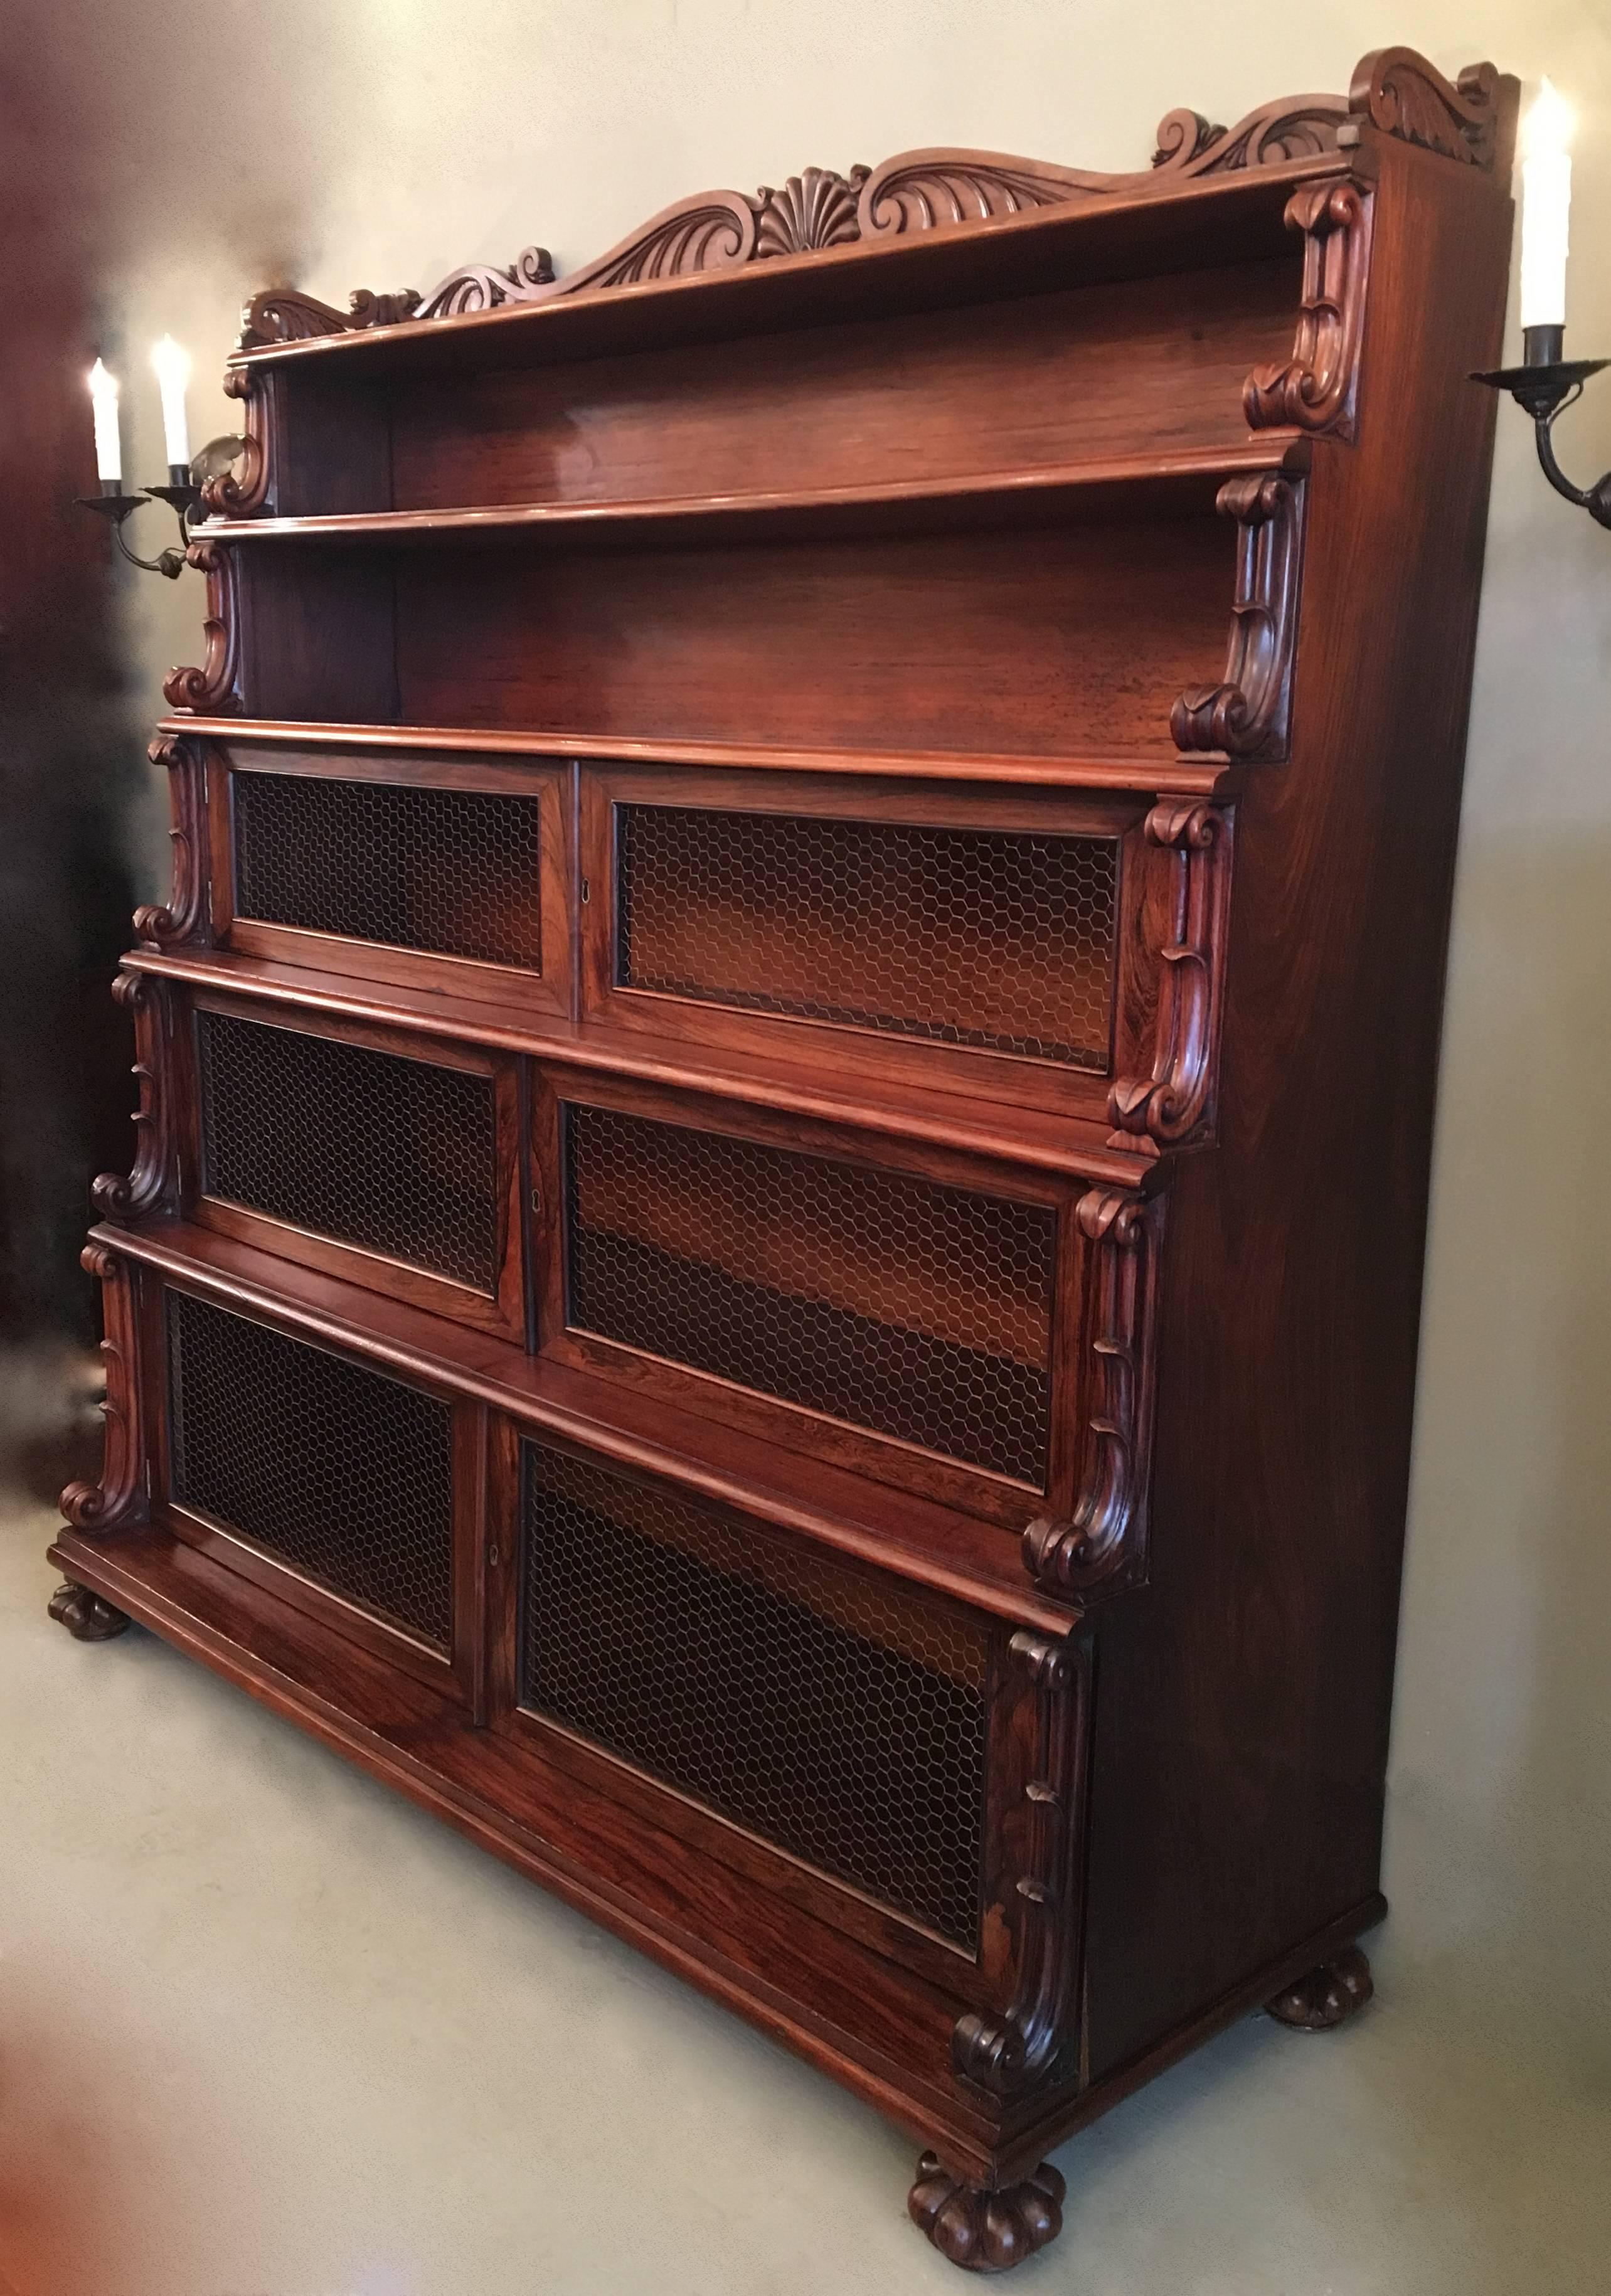 Cedar Early 19th Century West Indies Bajan Rosewood Tiered Bookcase with Shell Motif